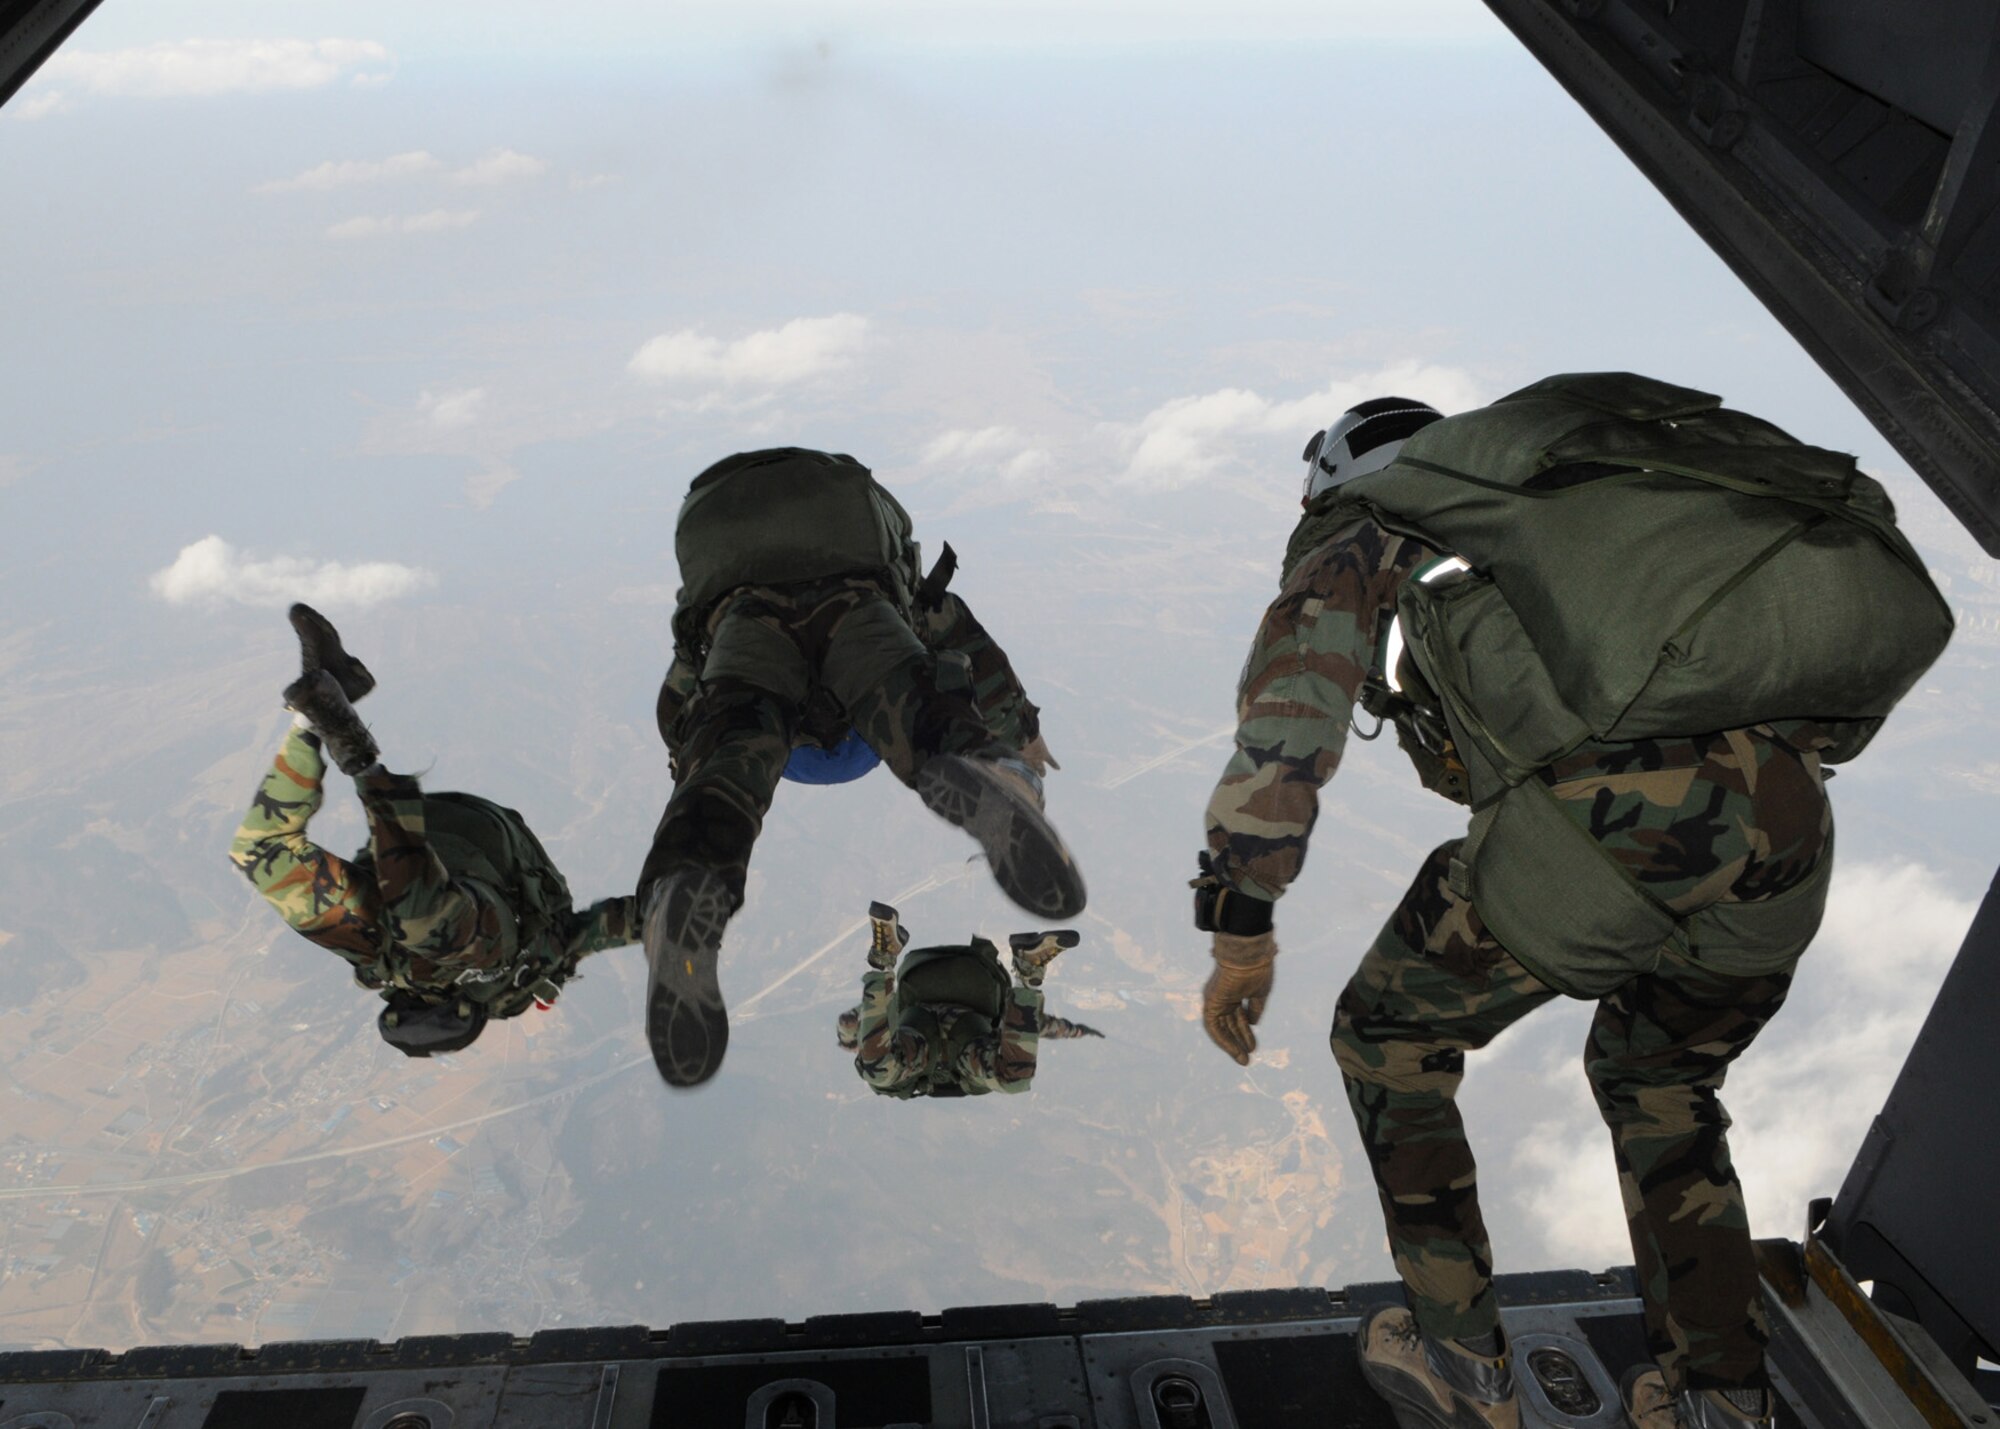 DAEGU AIR BASE, Republic of Korea -- Members from the 320th Special Tactics Squadron jump from the back of a 1st Special Operations Squadron MC-130H Combat Talon II here March 19. The high altitude, low opening jump training is in preparation for the group's annual operational readiness exercise which affords unit members an opportunity to practice wartime skills necessary for their ability to survive and operate. The 353rd Special Operations Group is the focal point for all U.S. Air Force special operations activities throughout the U.S. Pacific Command theater. (U.S. Air Force photo by Tech. Sgt. Aaron Cram)
